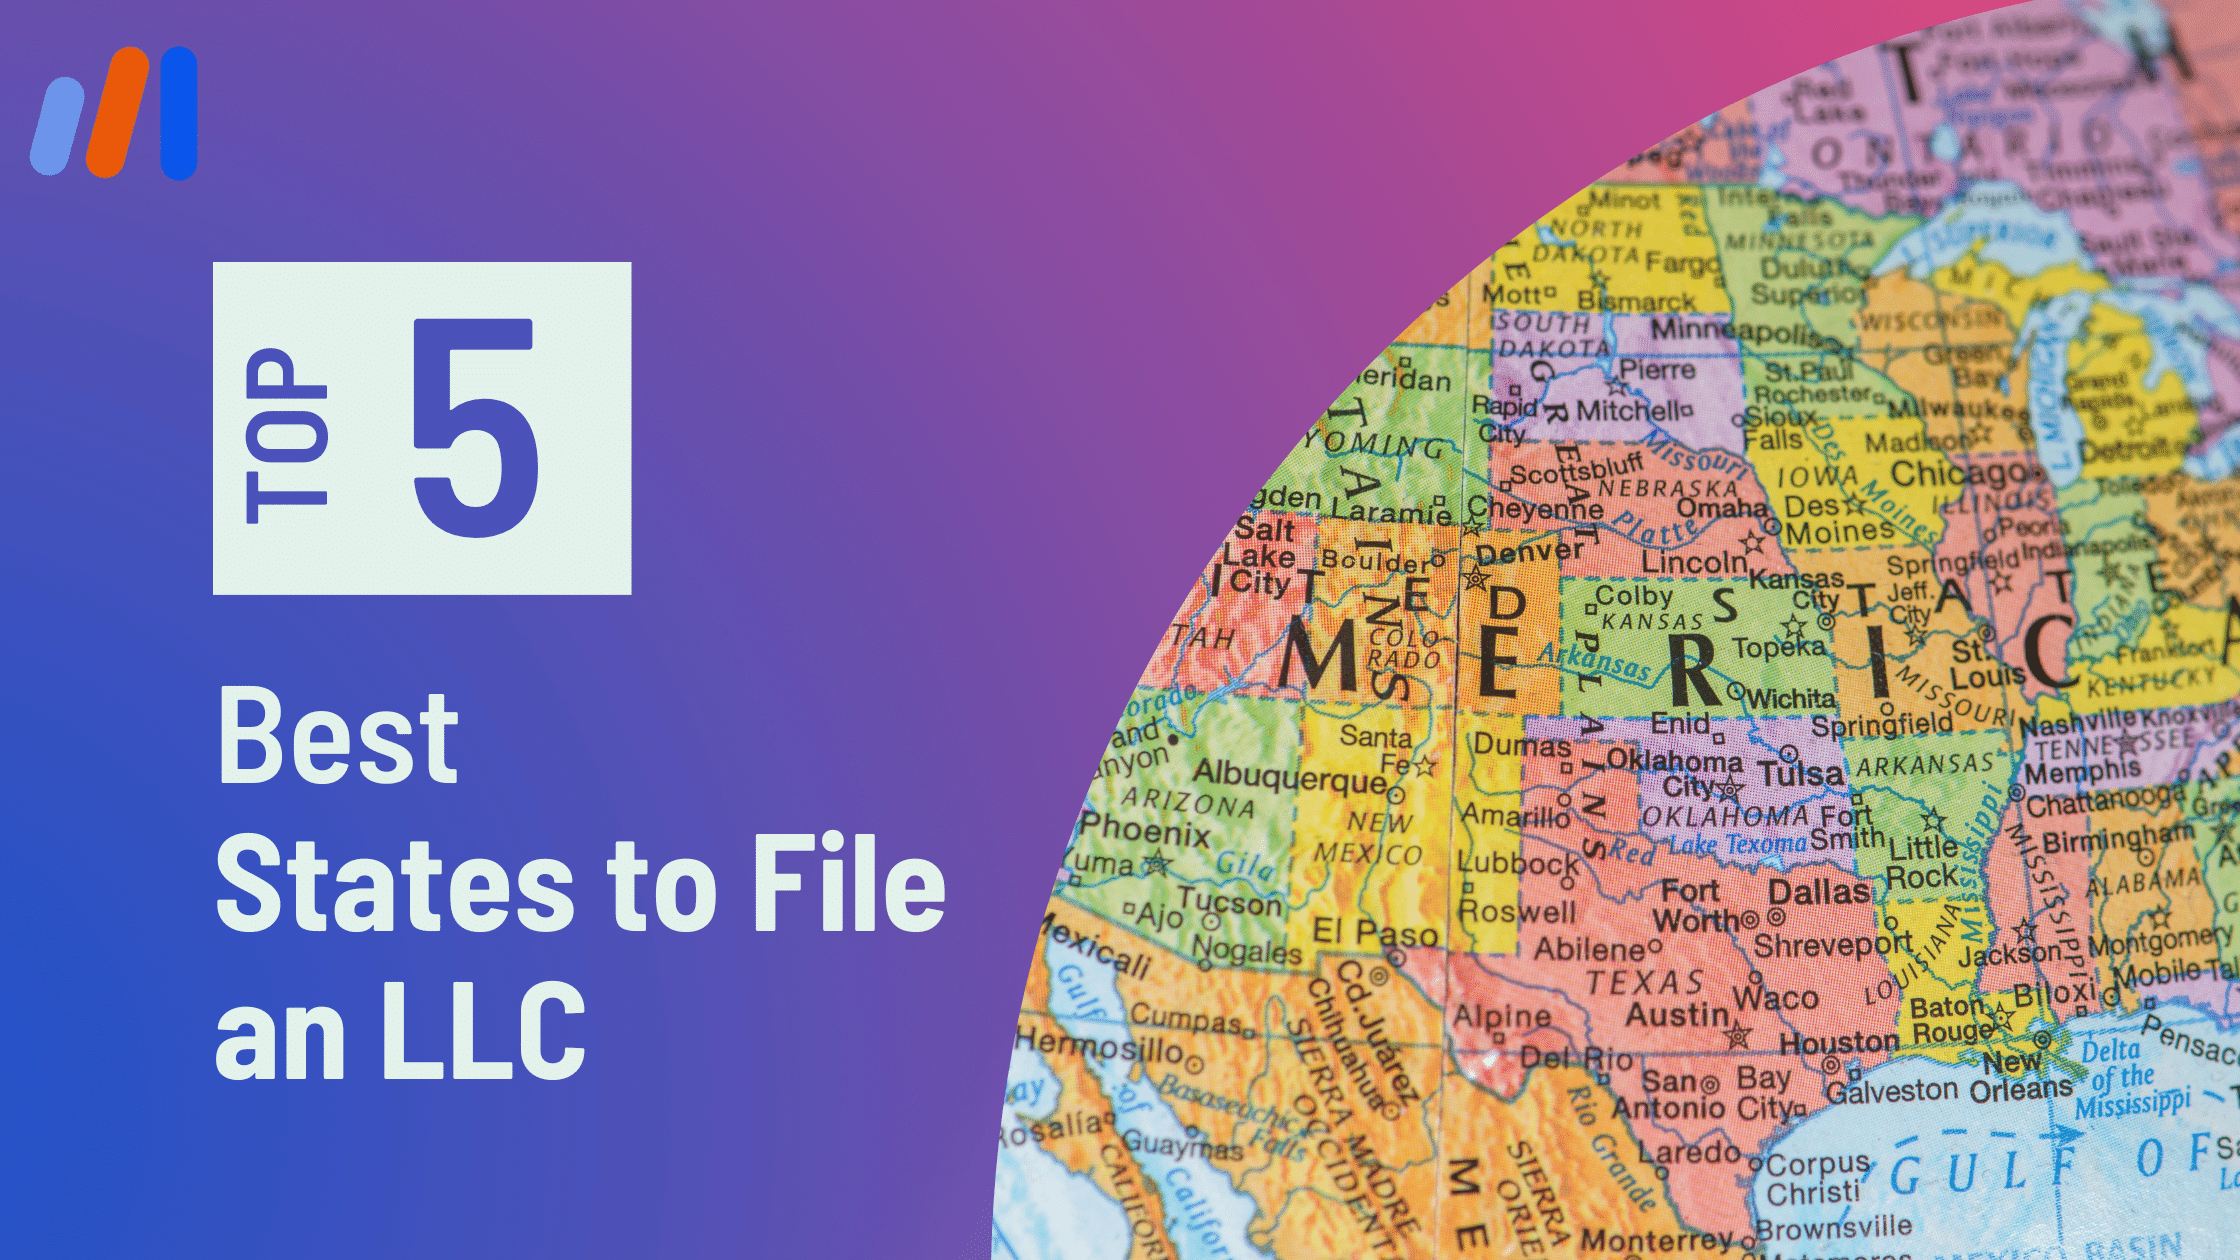 Best States to file an LLC